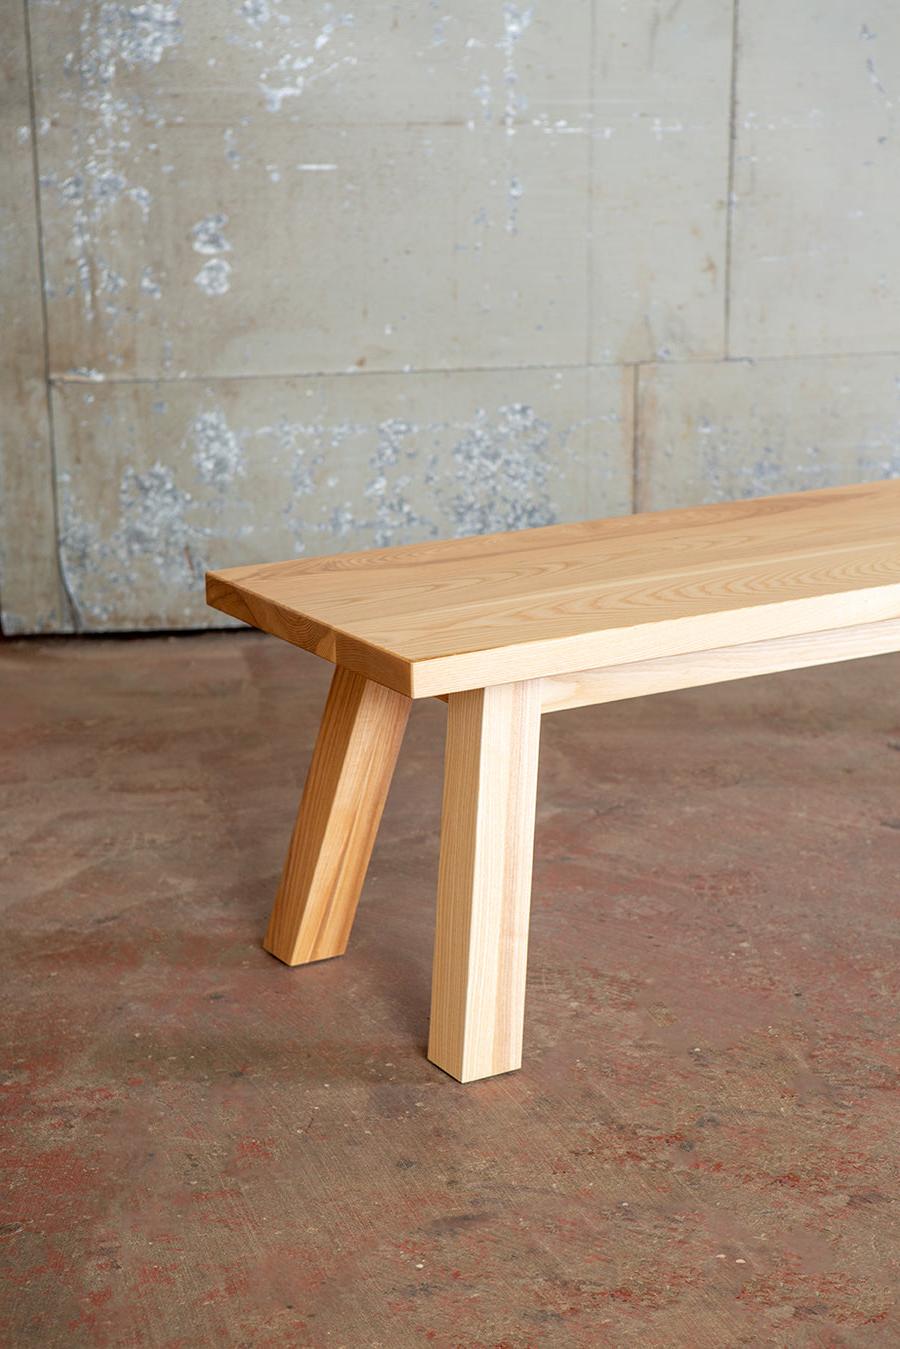 solid wood bench angled legs